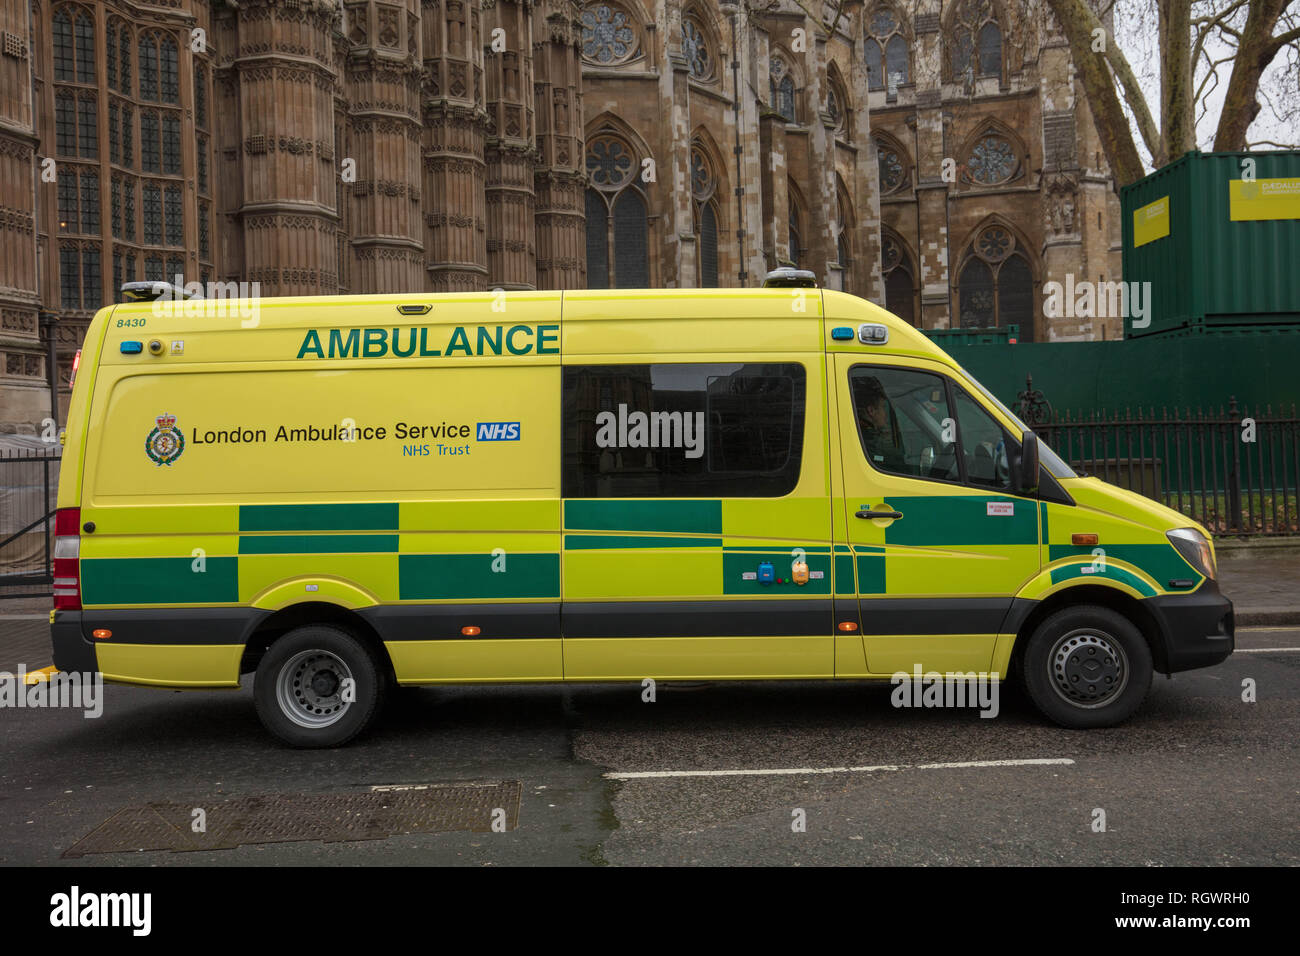 London Ambulance near Parliament Square, London, UK, responding to one of the many emergency calls received in one of the LAS control rooms. Stock Photo